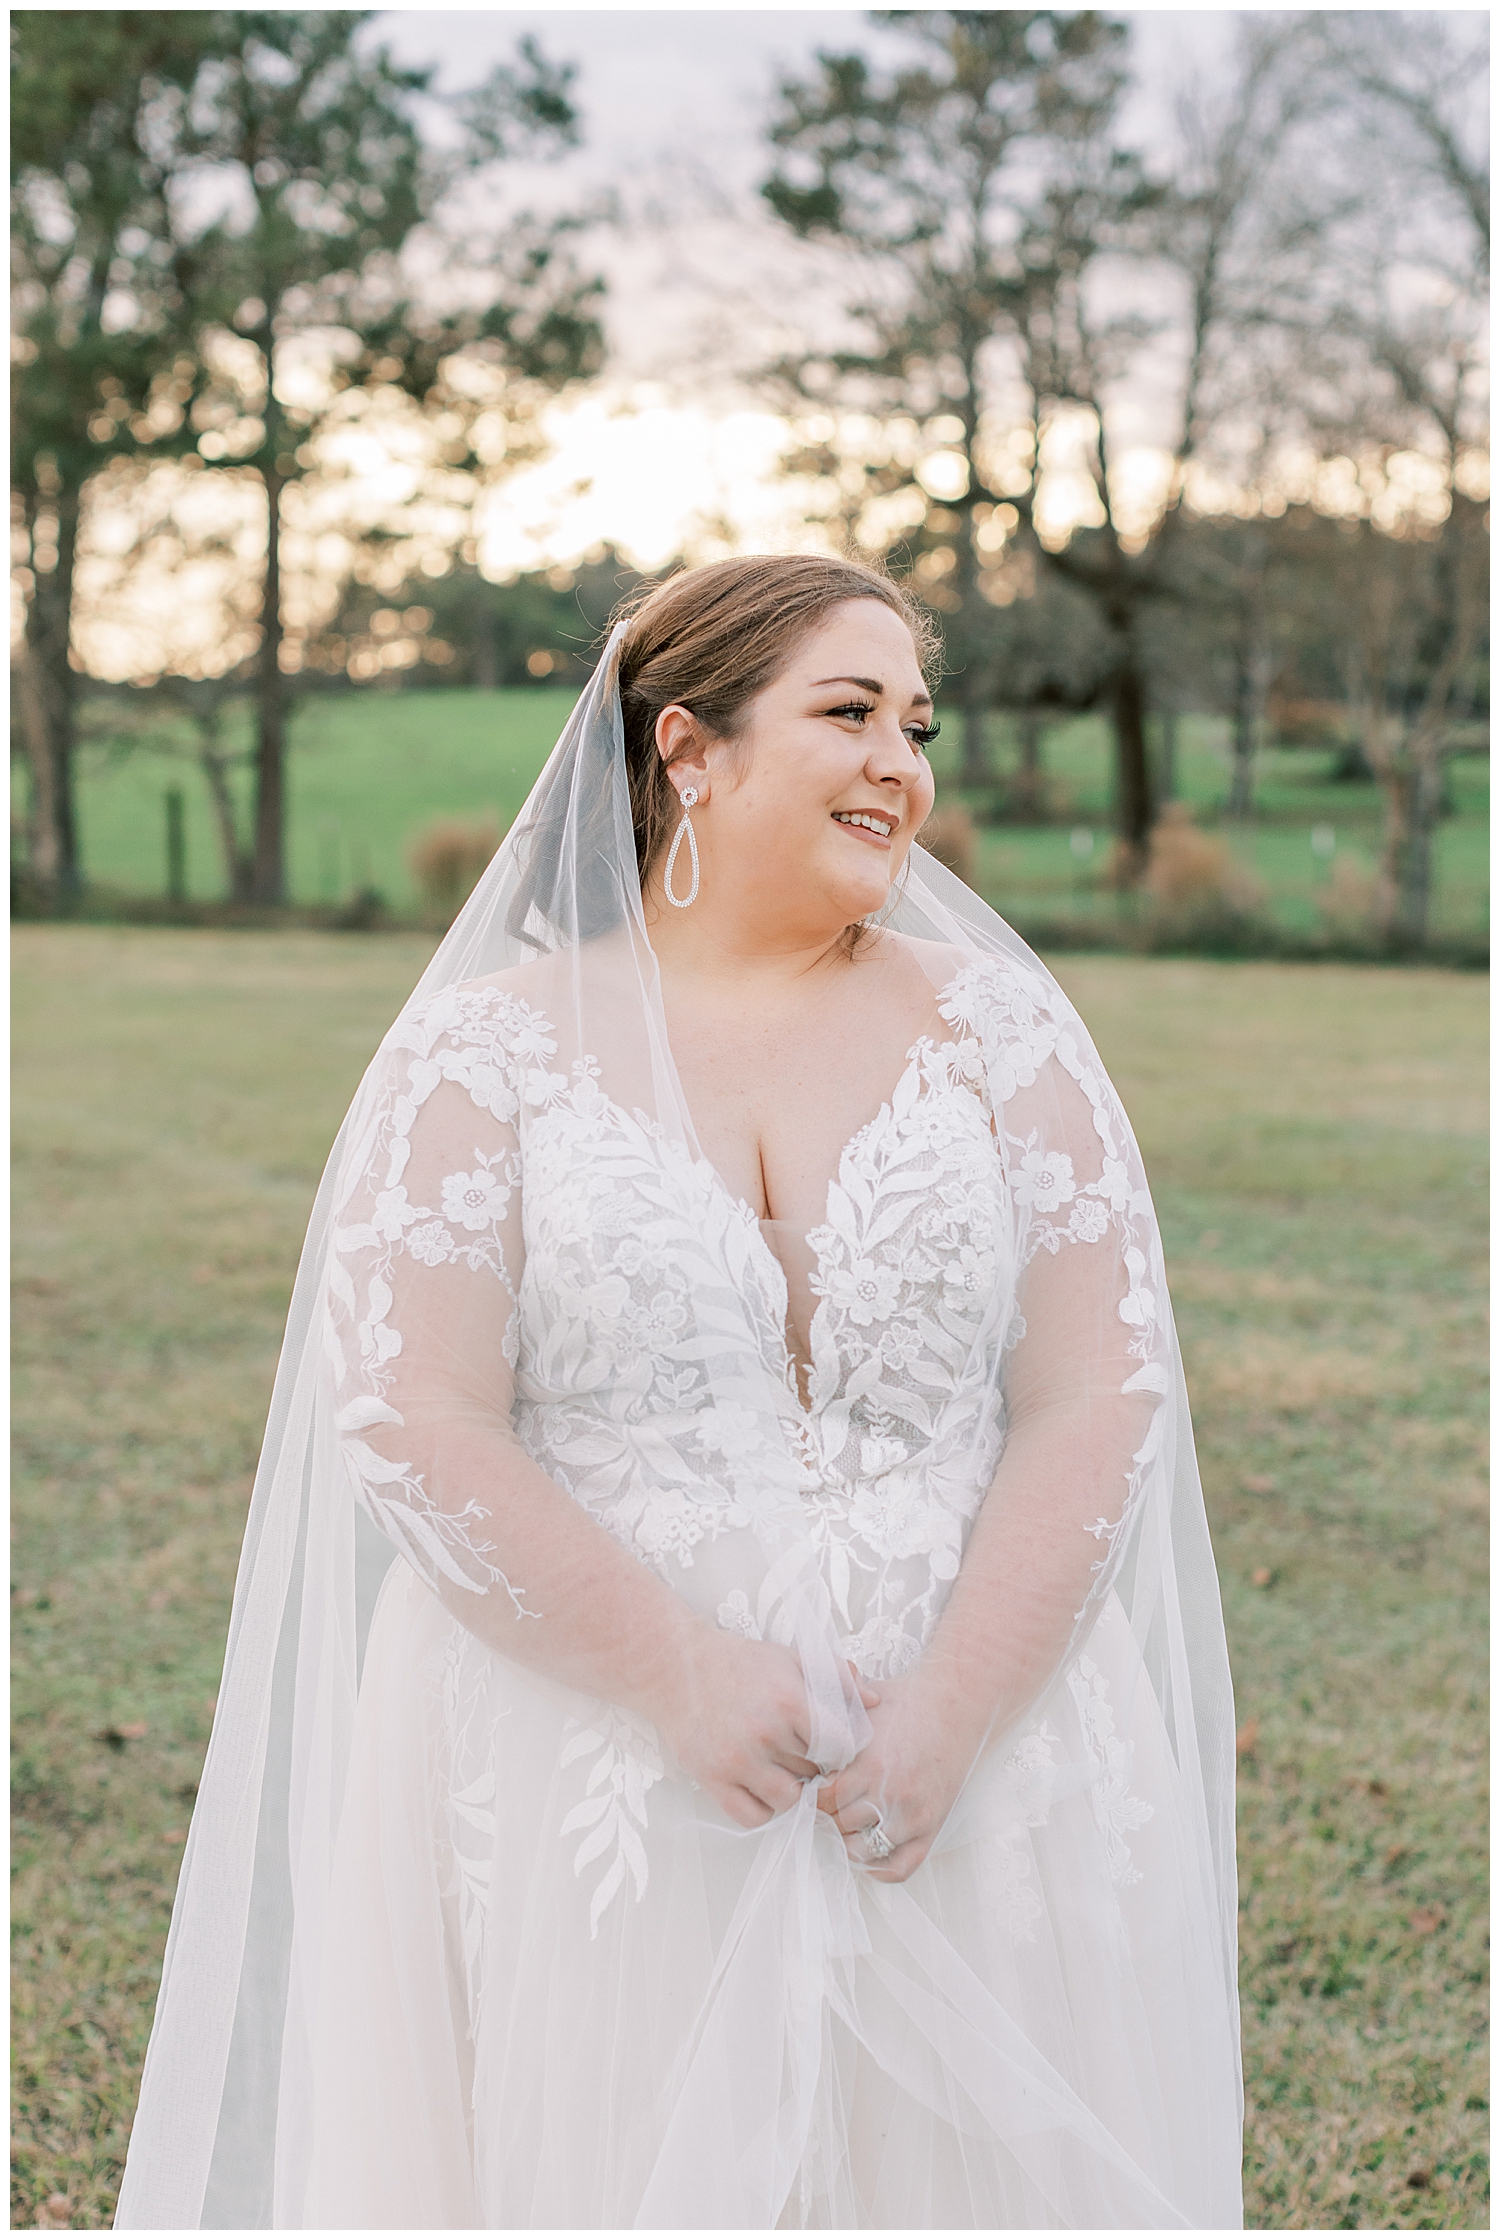 A bride laughs while standing in a field.